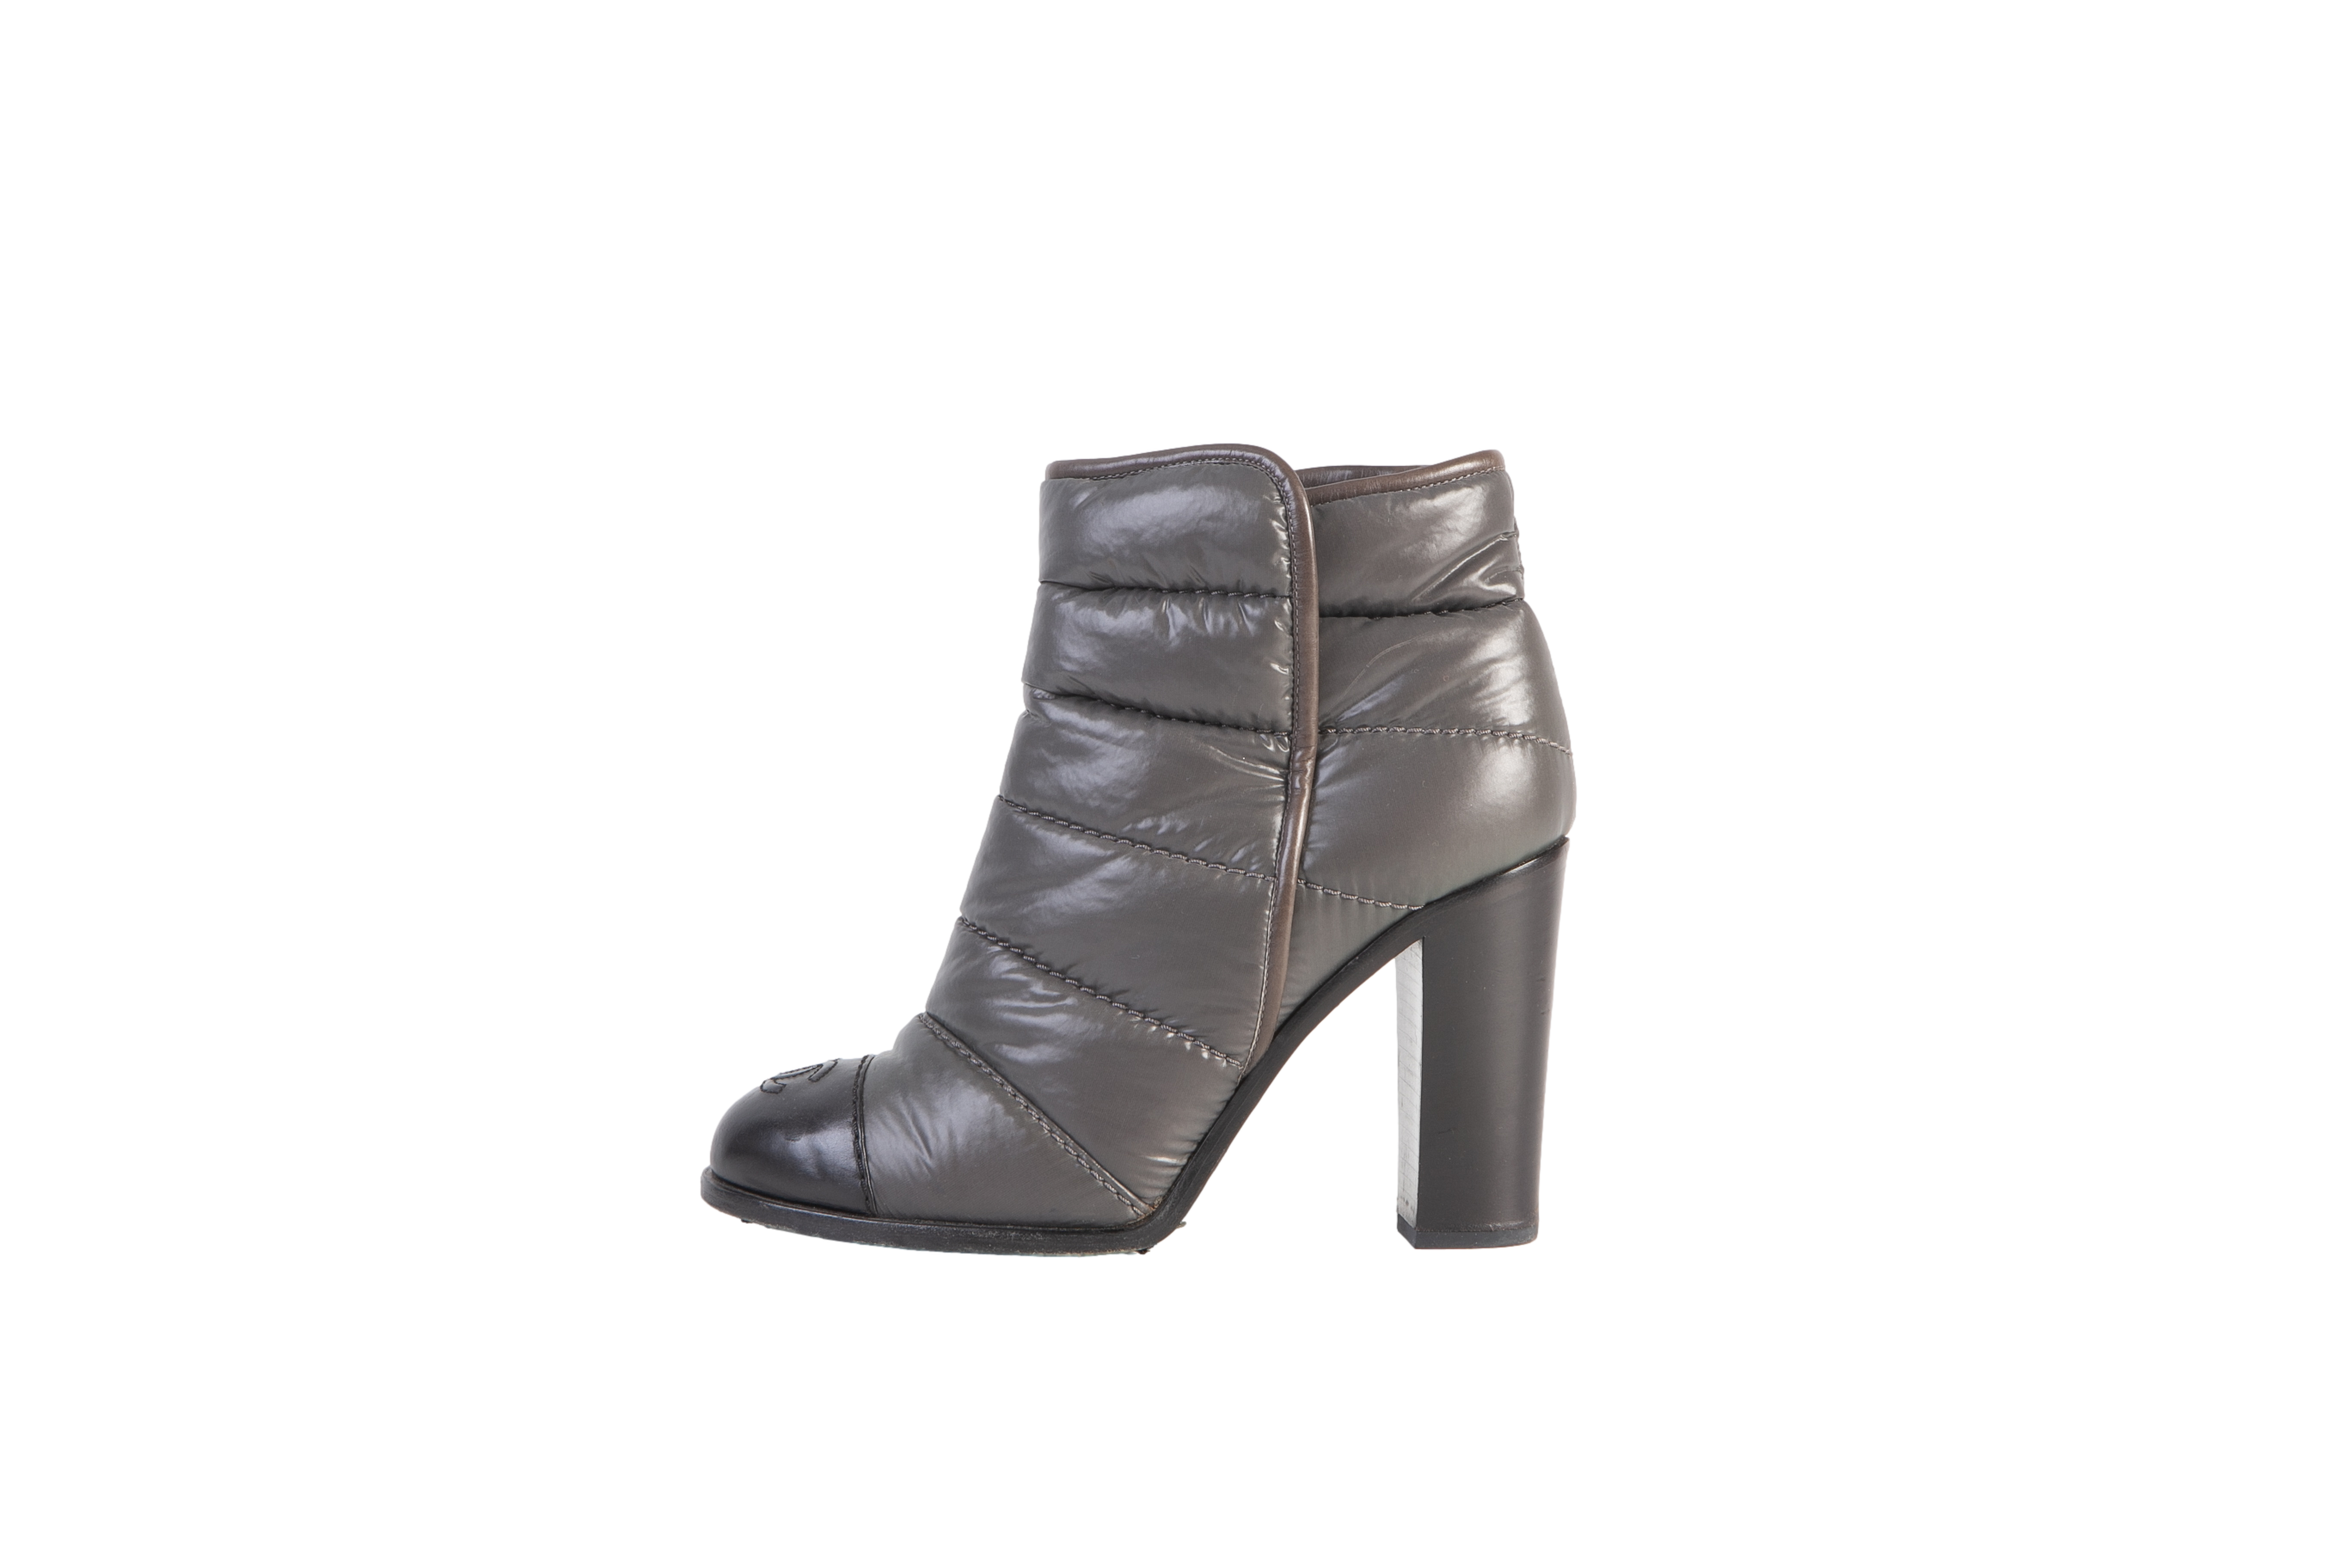 DESAPEGO THASSIA NAVES CHANEL ANKLE BOOT PUFFER